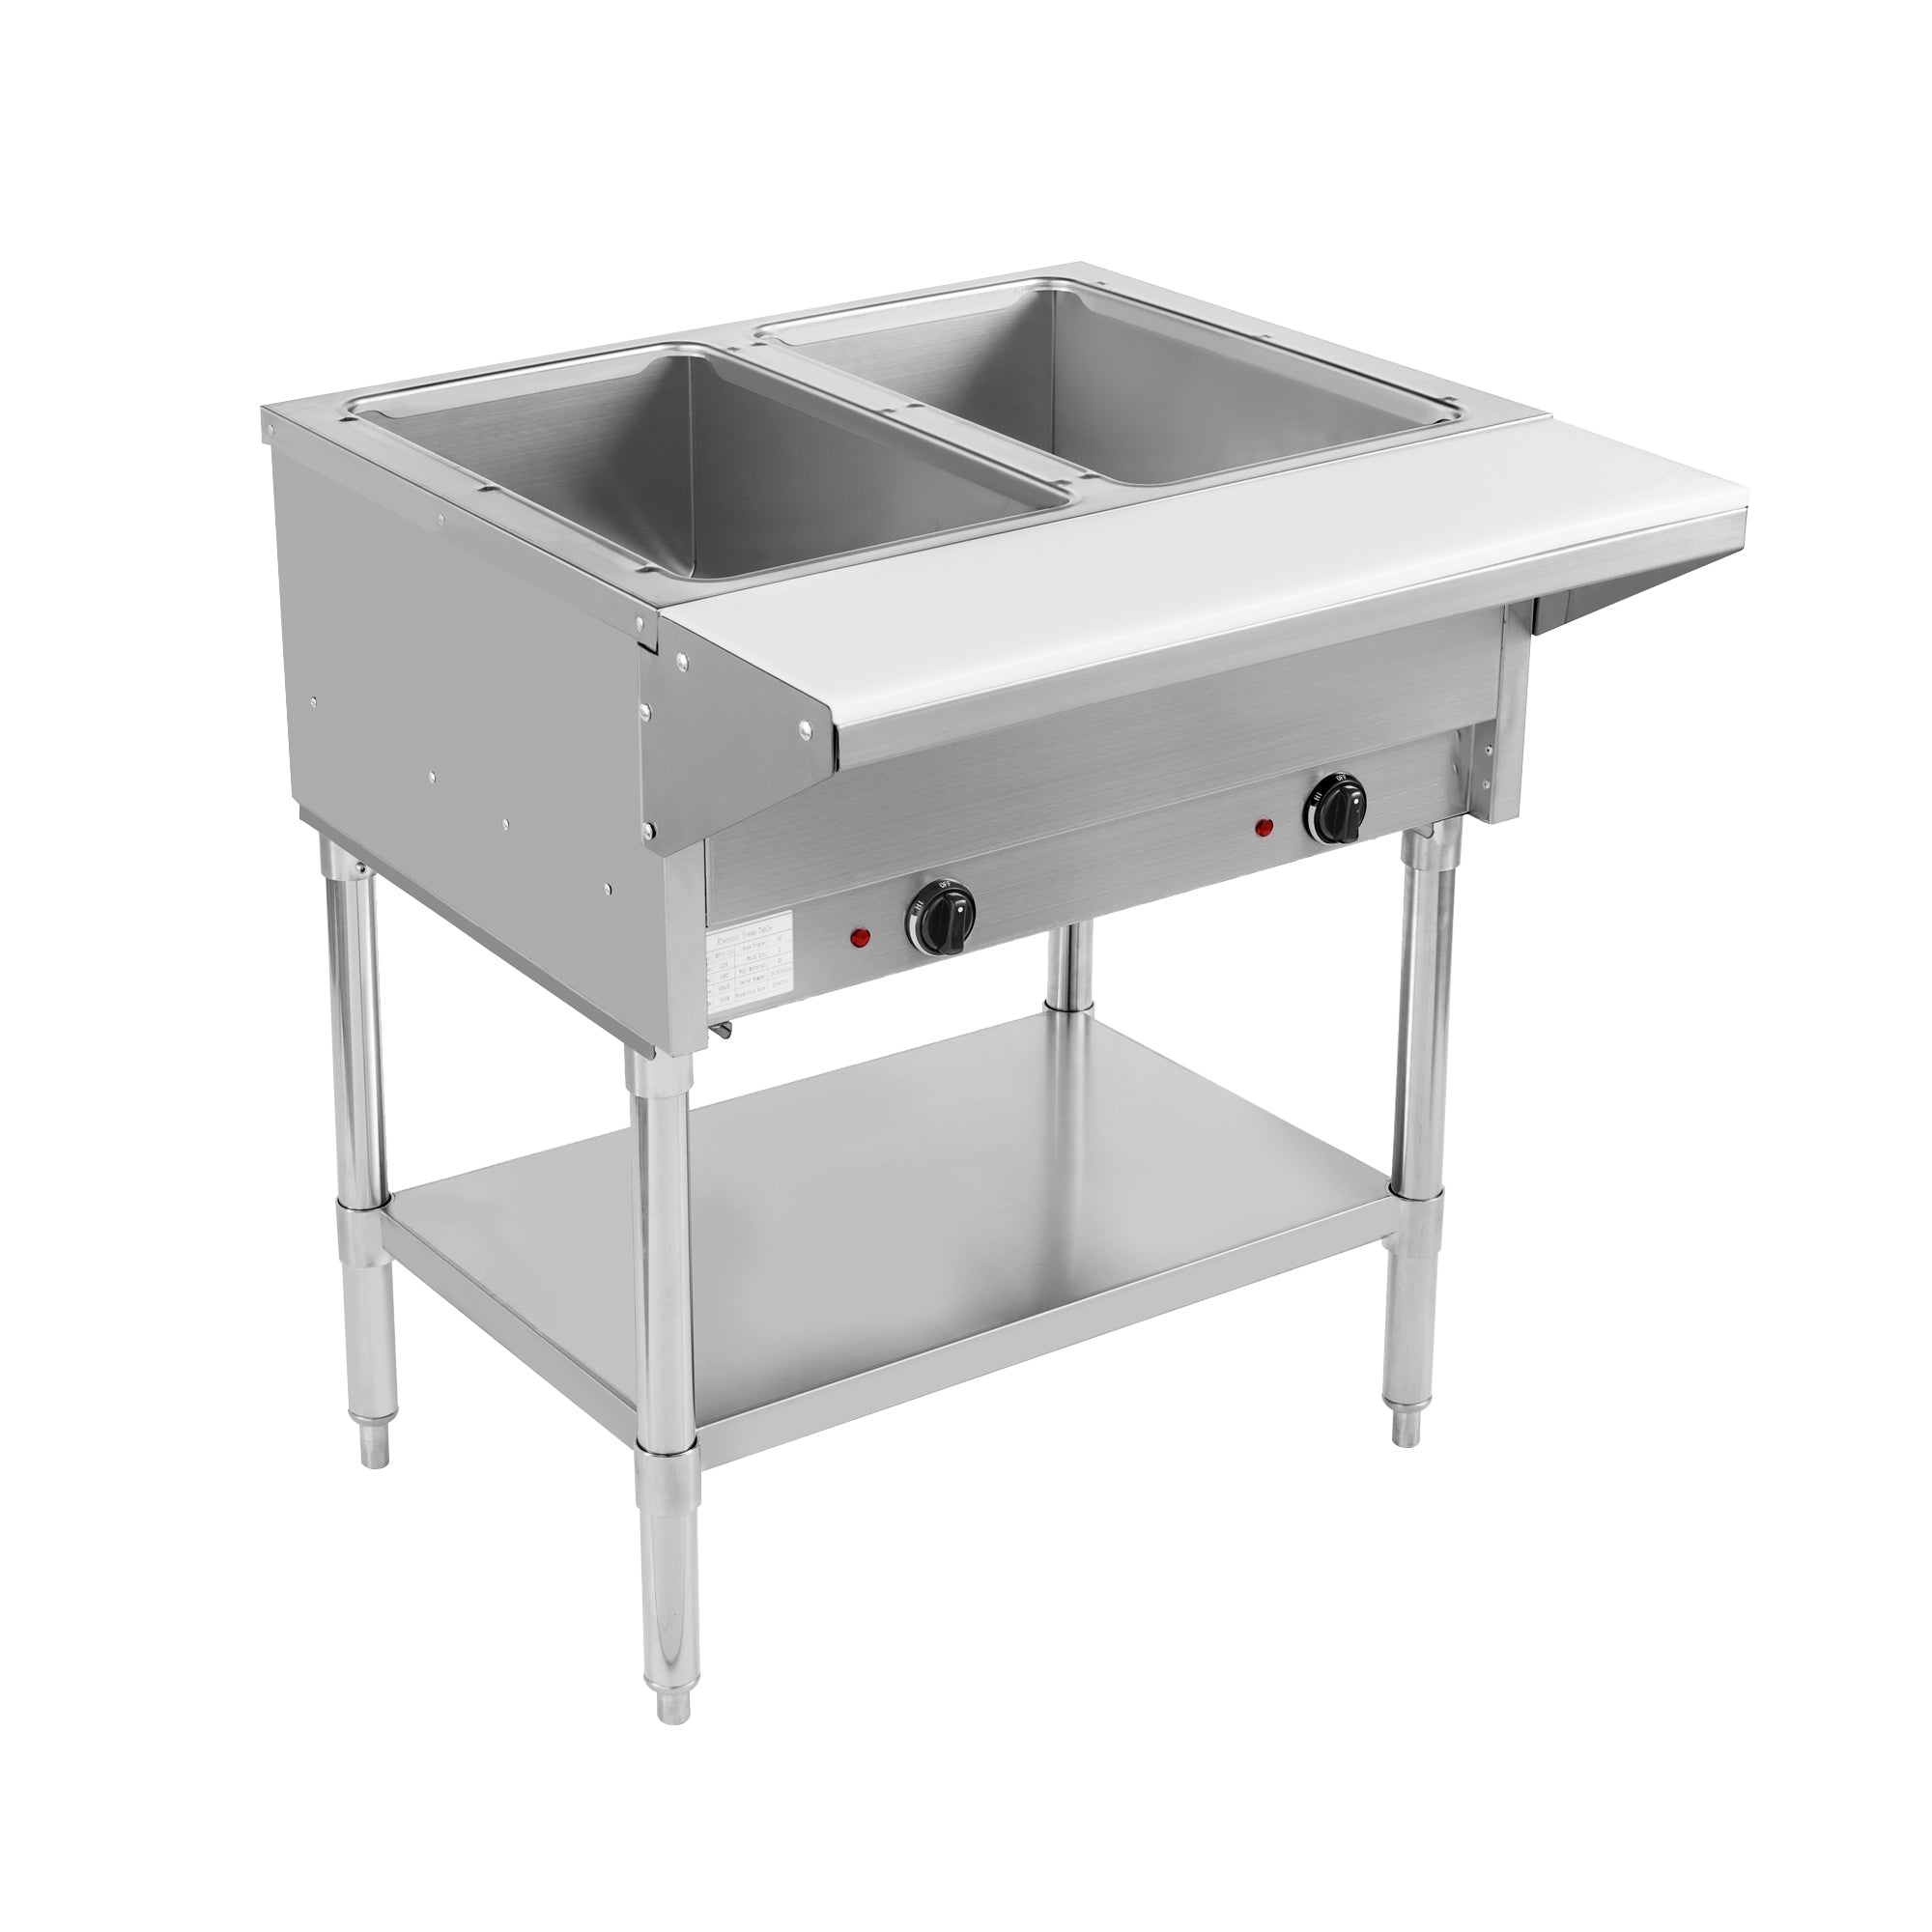 BevLes - BVST-2-120, BevLes 2 Well Electric Steam Table, 120V, in Silver